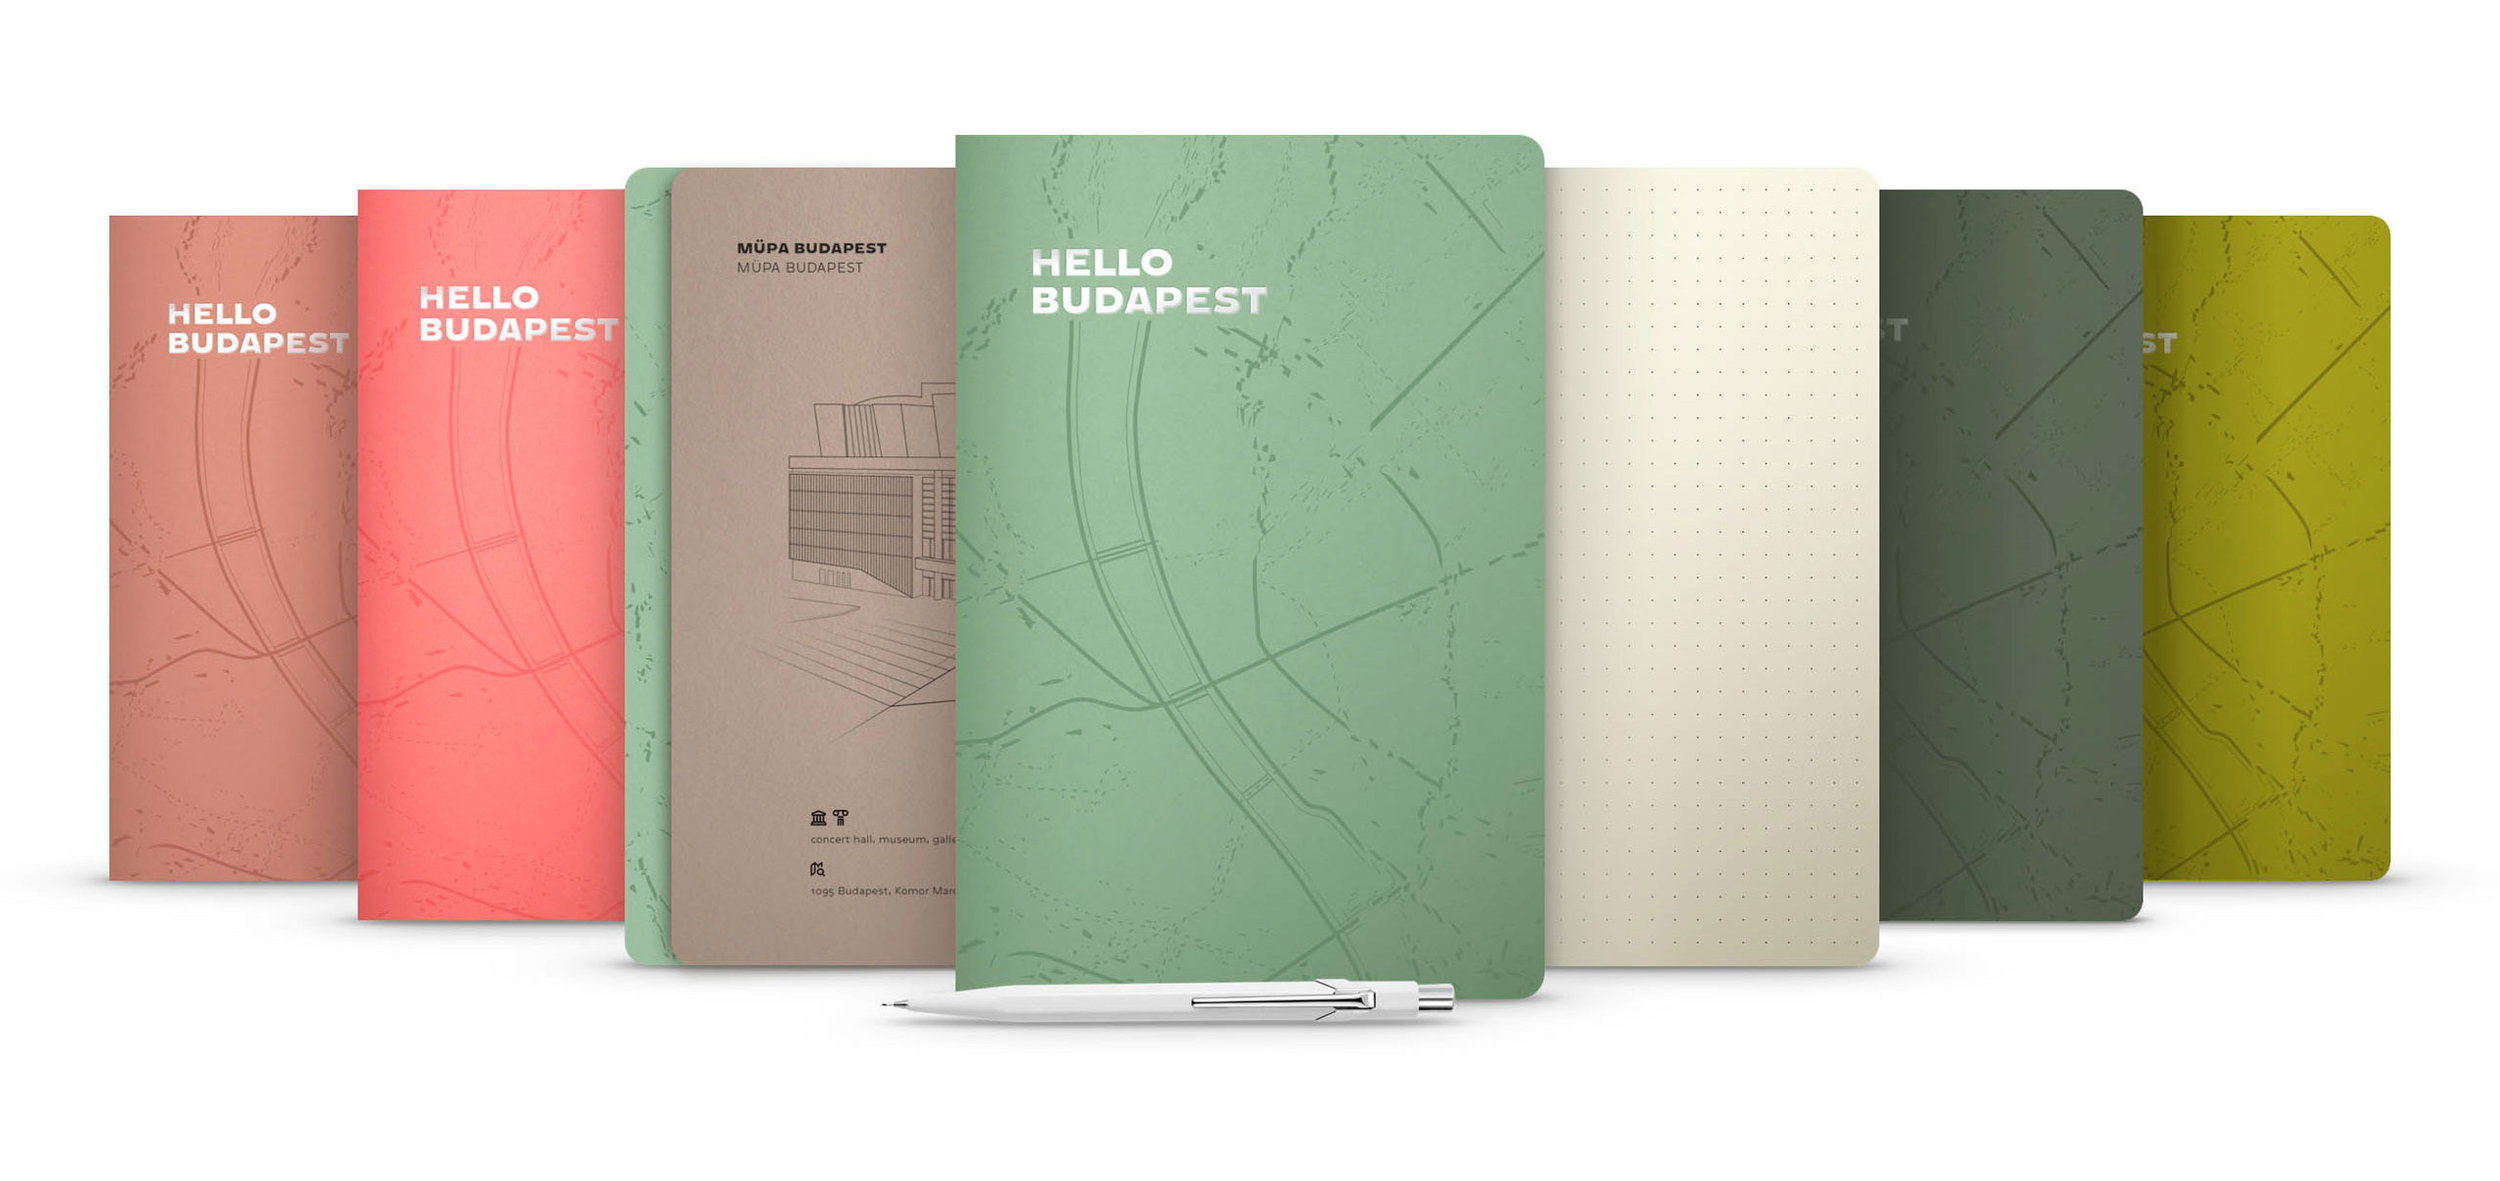 Iconic Budapest Sights Illustrated On Notebooks by Hellodesign